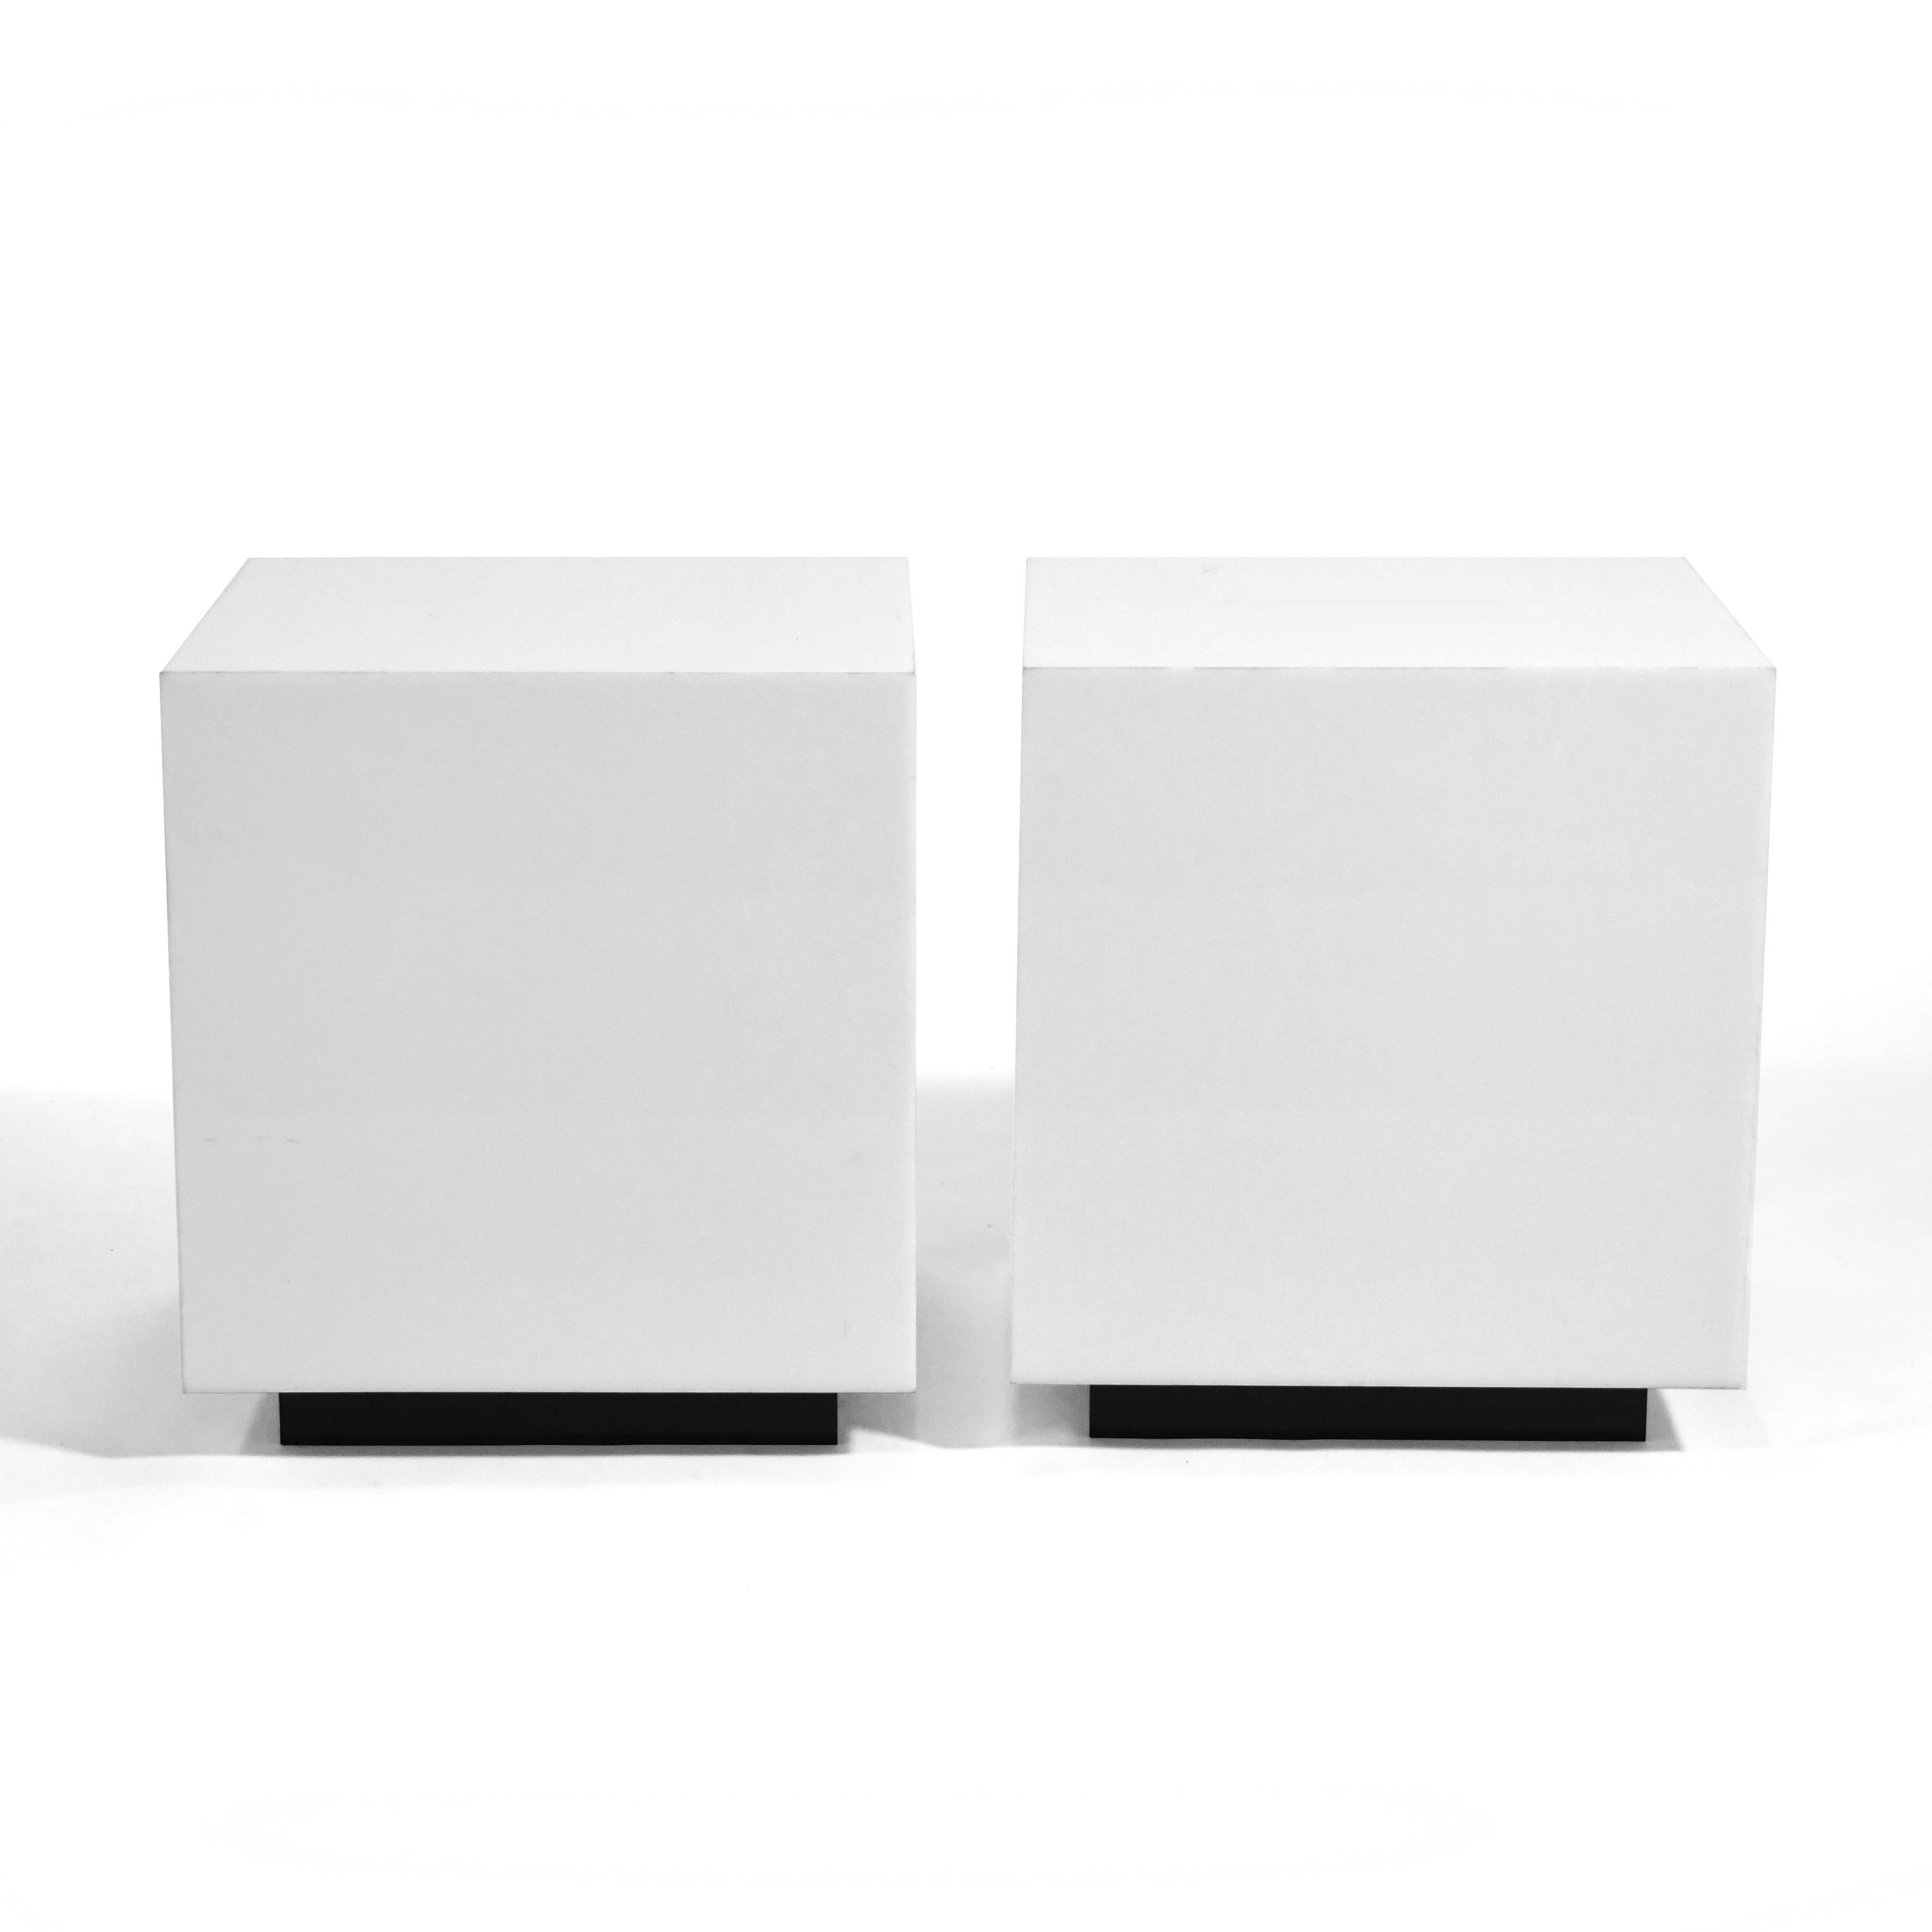 American Pair of White Lucite Cube Tables/ Pedestals